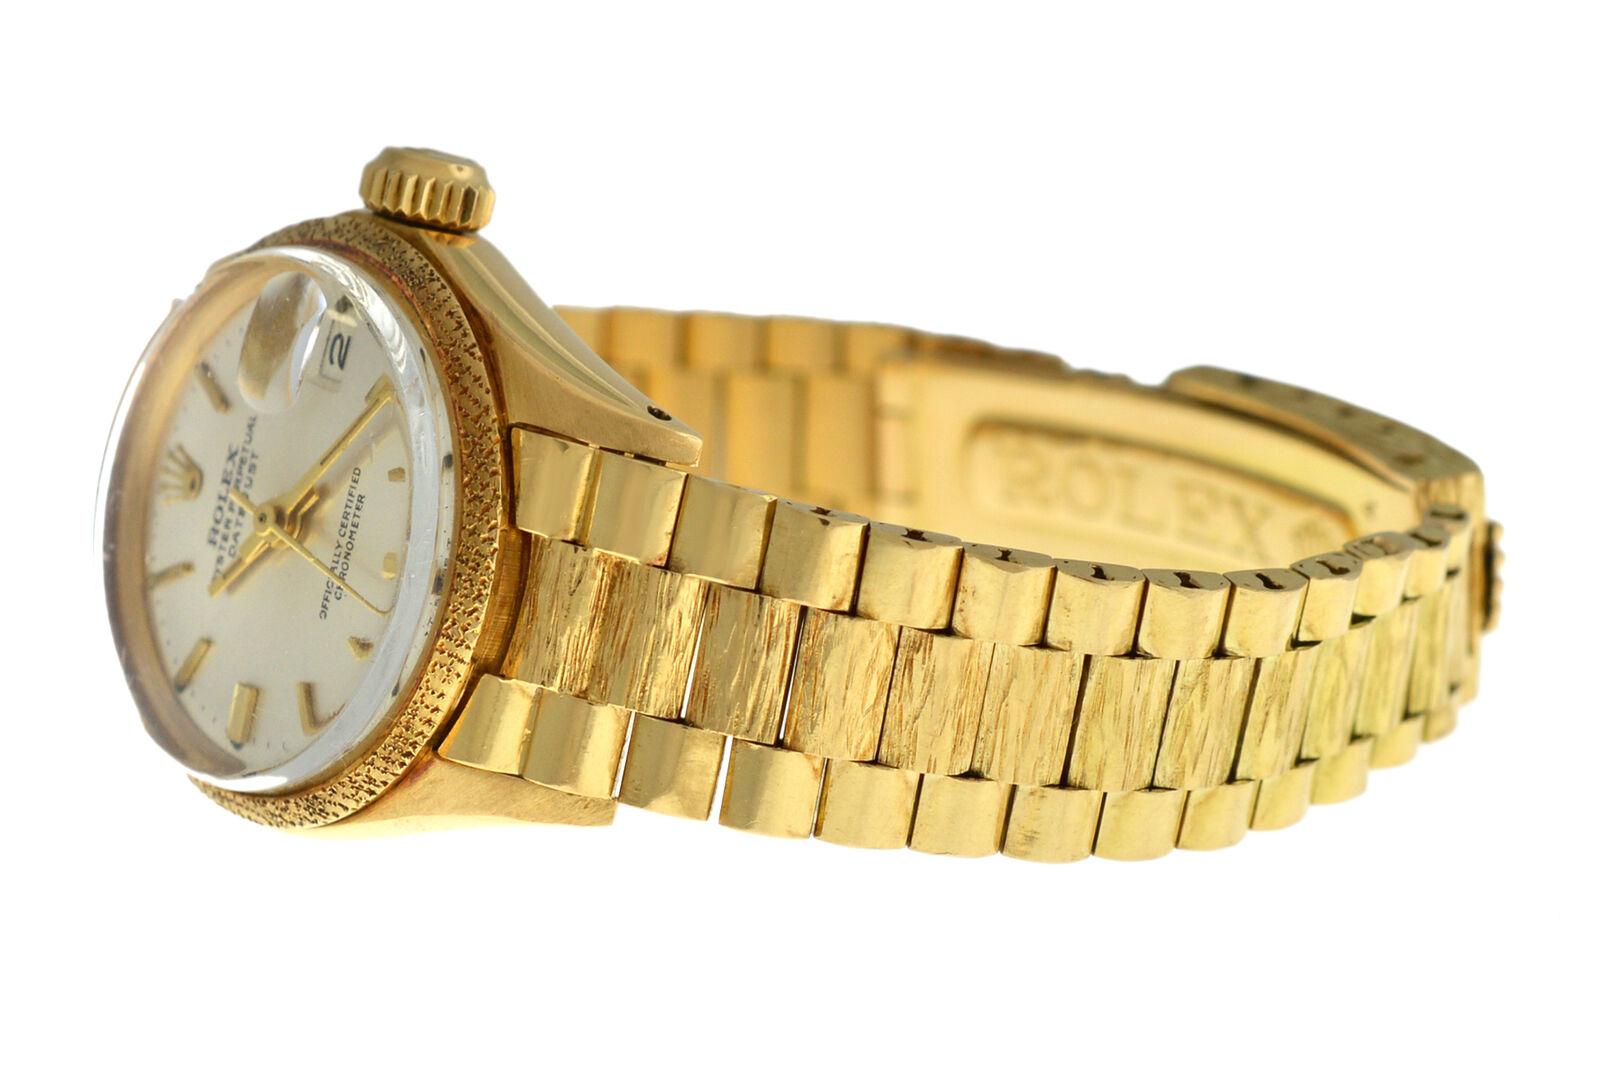 Ladies Rolex Oyster Perpetual Date Just 6701 18 Karat Yellow Gold Watch 3